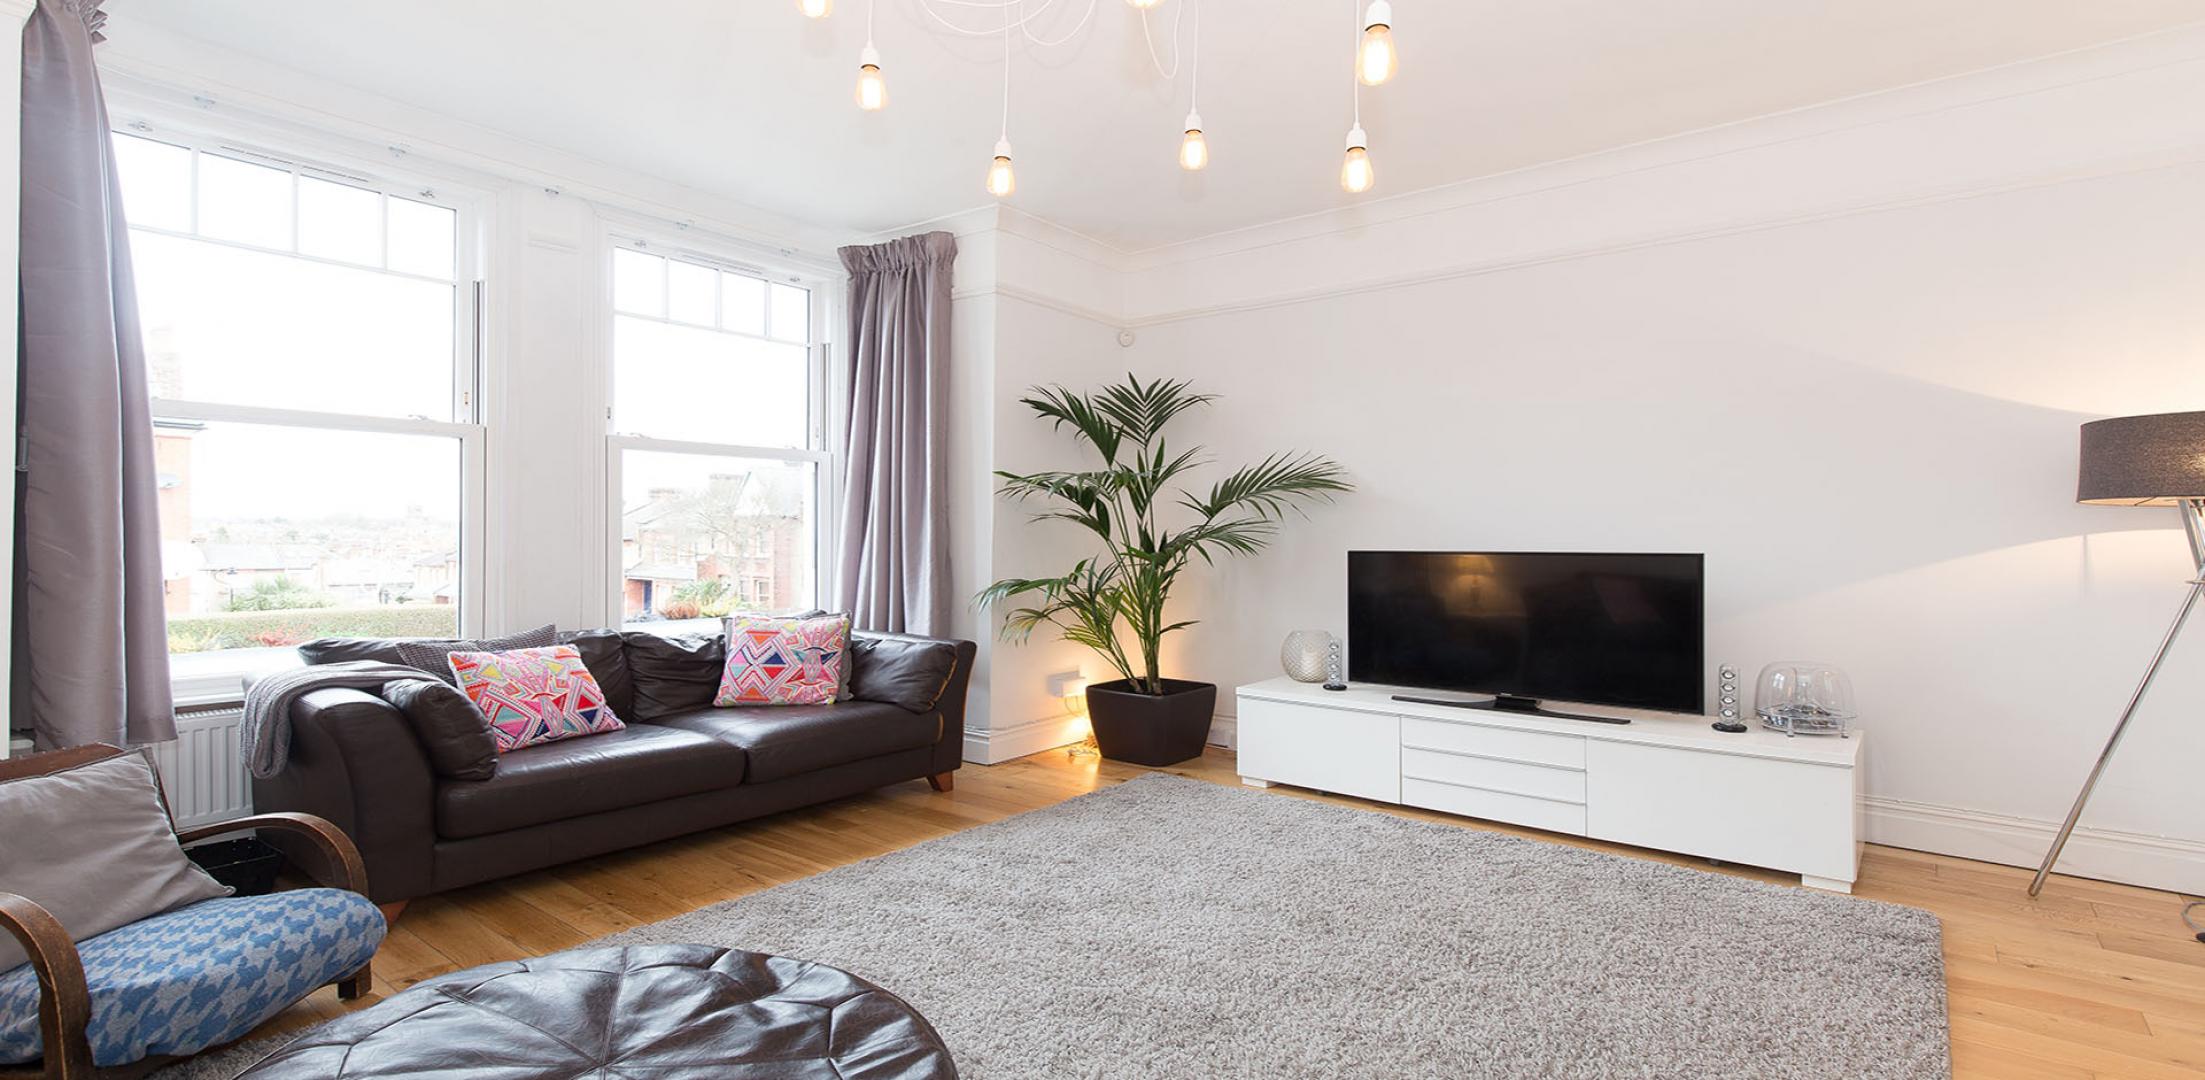 			A Must See Property, 2 Bedroom, 1 bath, 1 reception End Terraced House			 Cecile Park, Crouch End